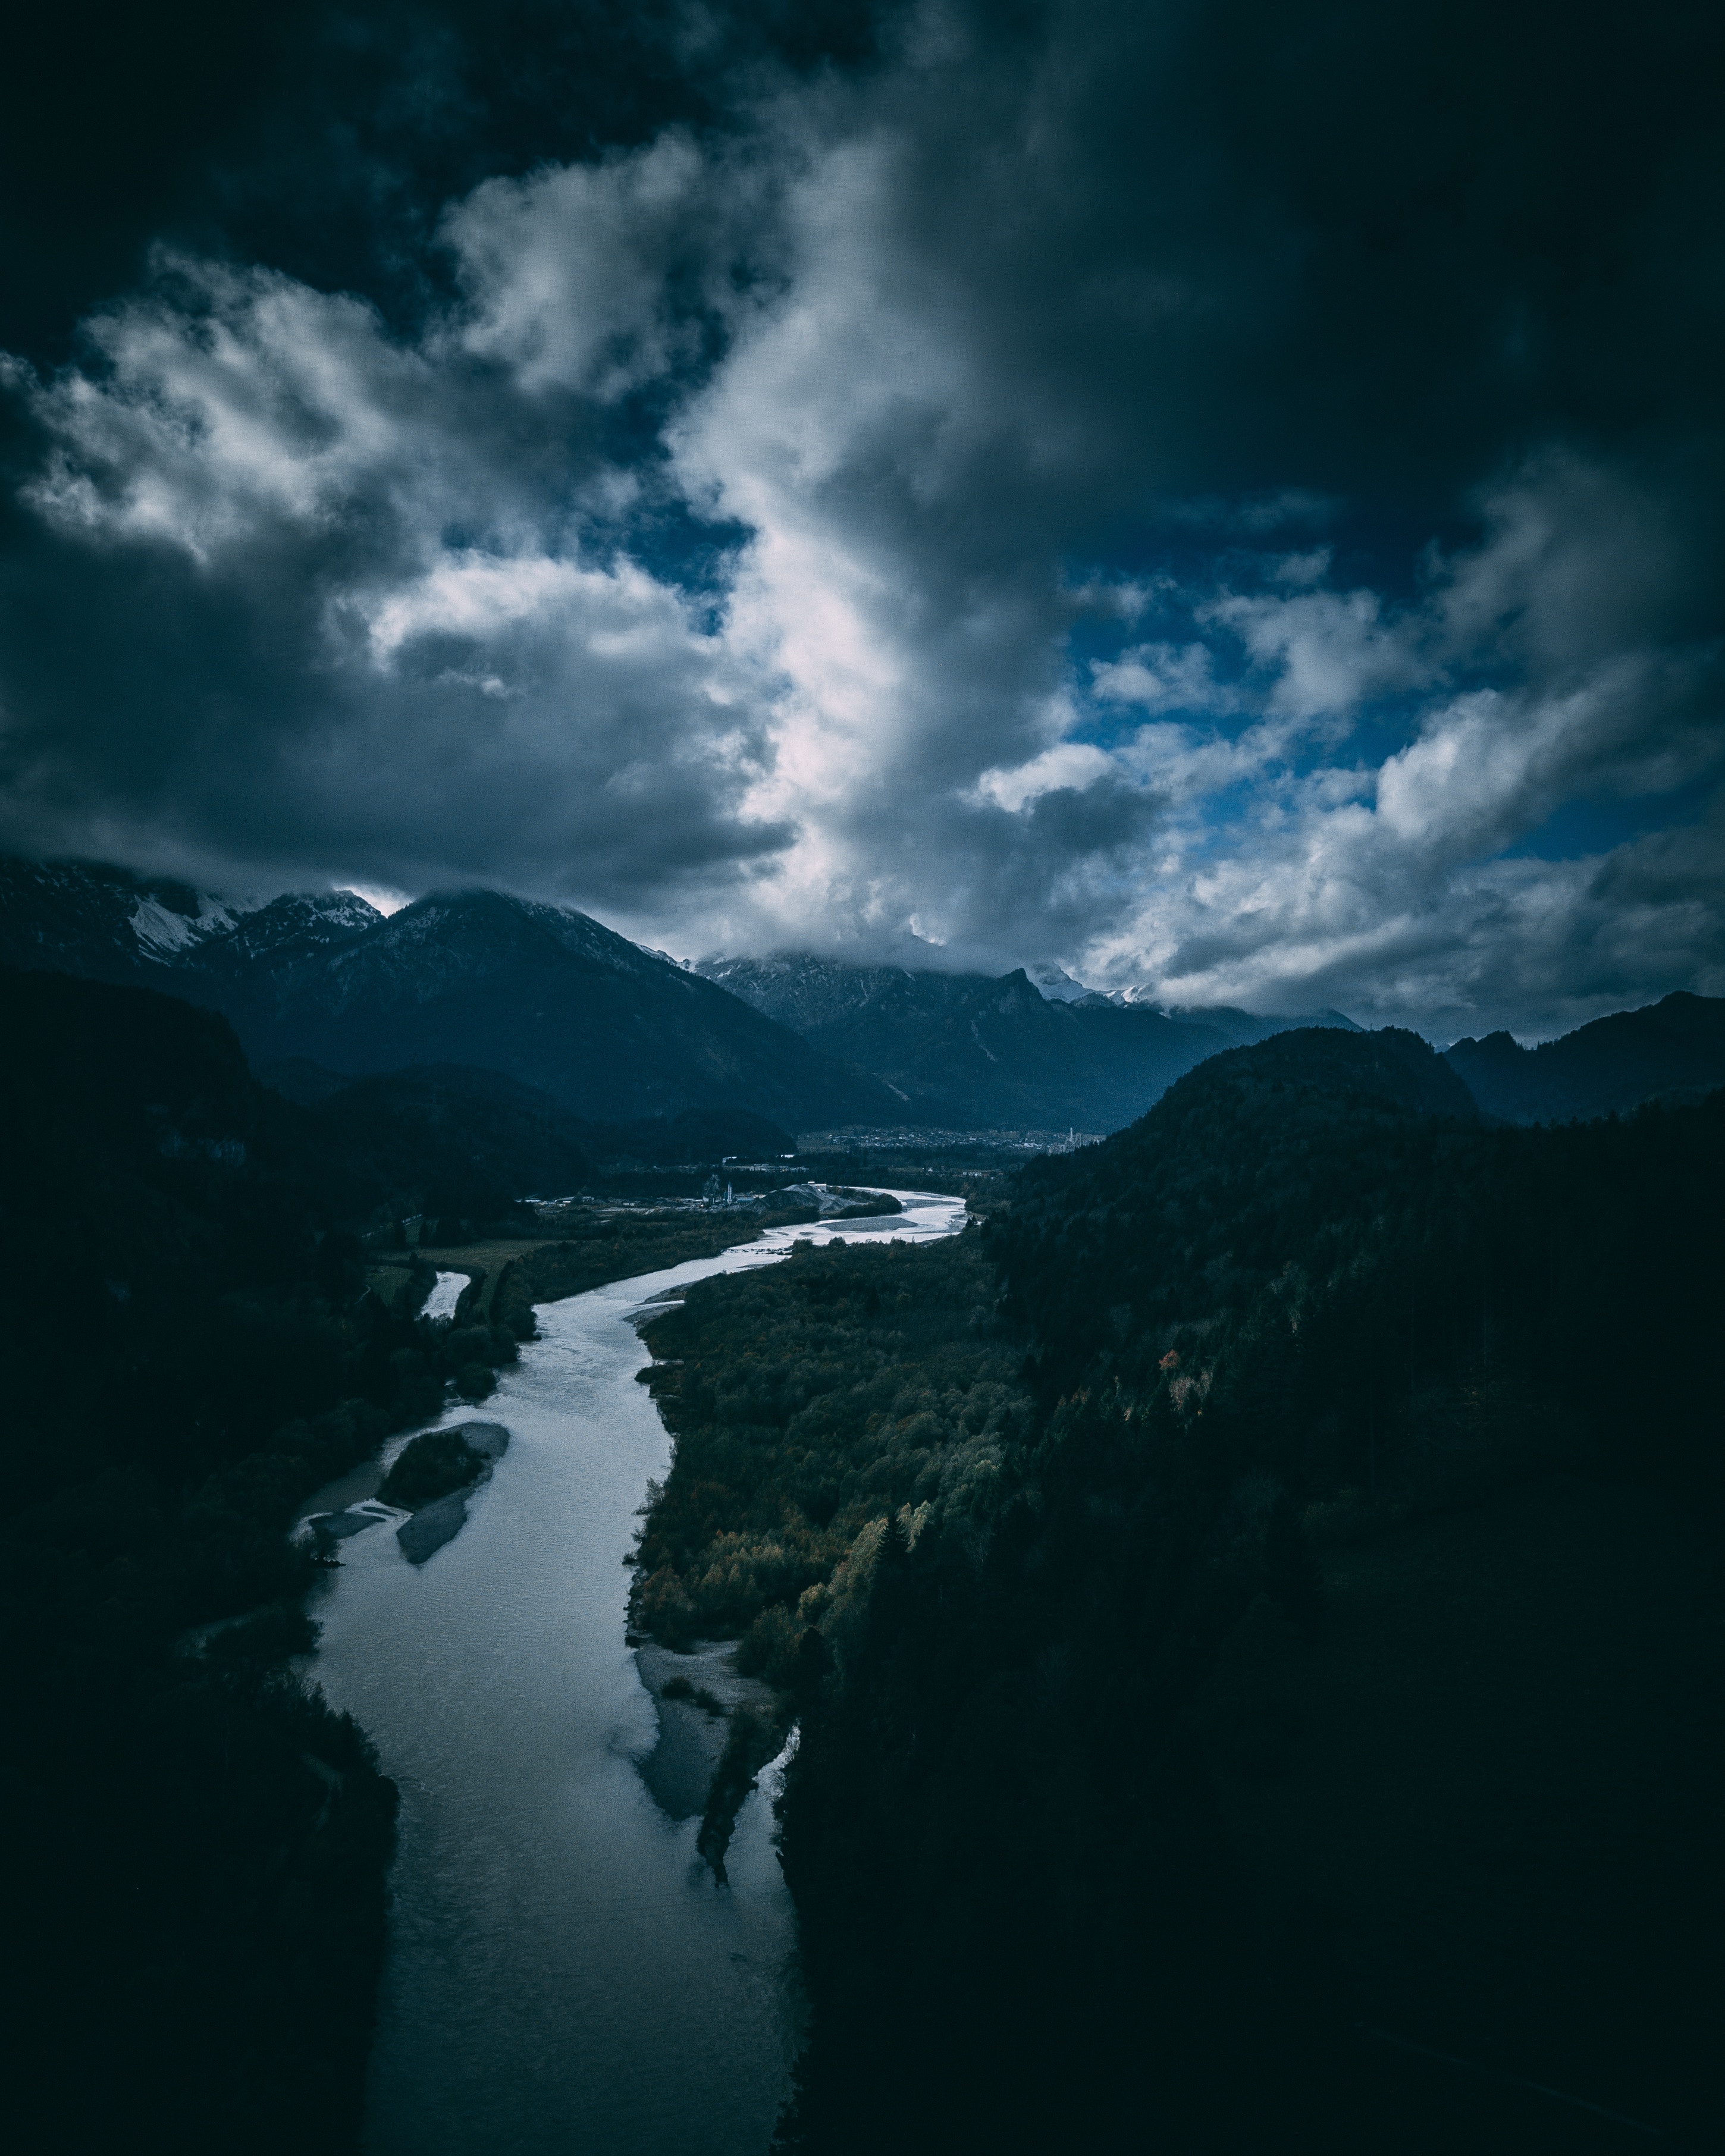 germany, trees, clouds, sky, nature, rivers, mountains, view from above